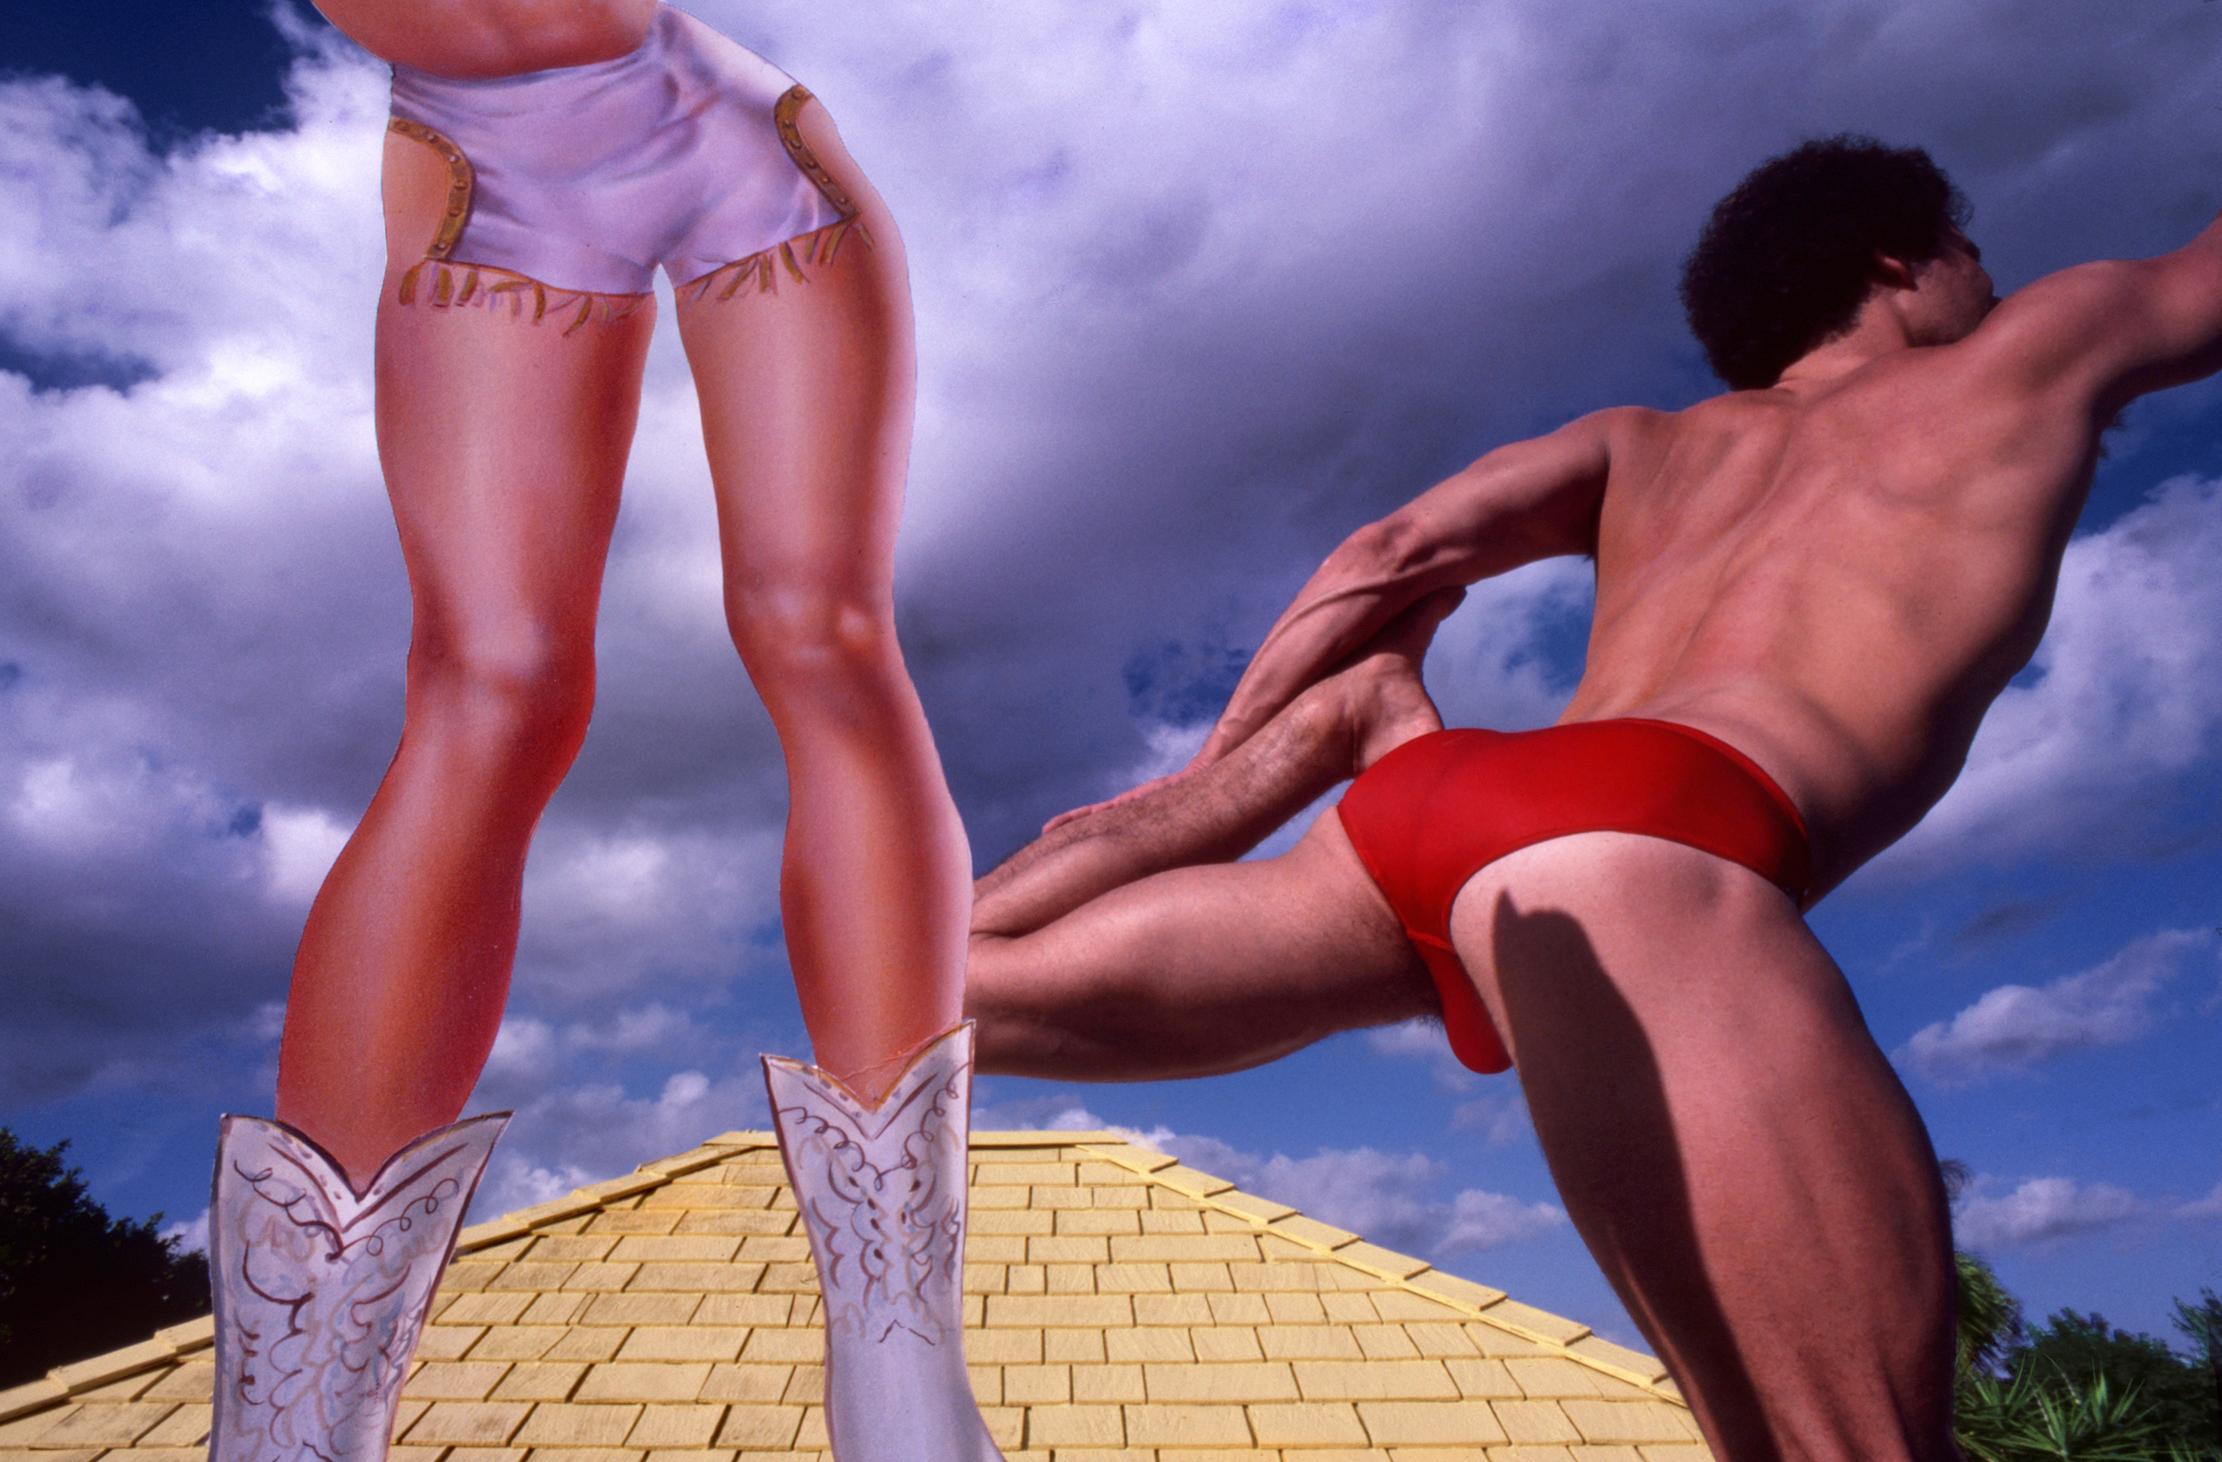 Robert Funk Nude Photograph - Muscular Male and  Leggy Female Figure on the Roof